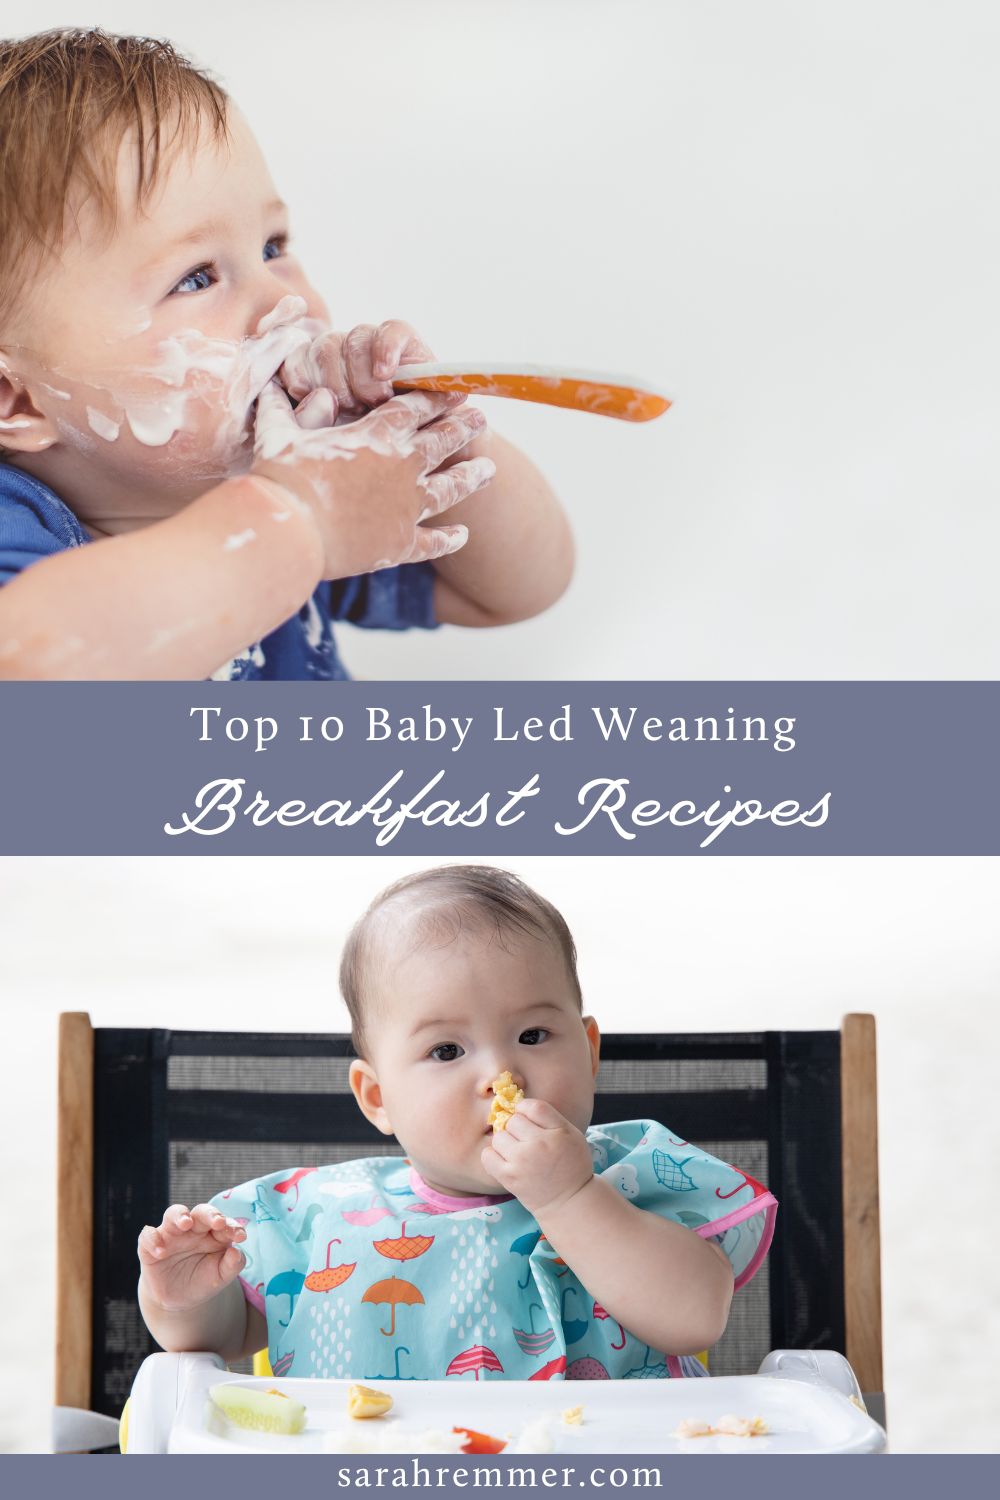 Not sure what to feed your baby for breakfast? Here are 10 nutritious breakfast ideas for baby-led weaning  for infants 6-12 months of age